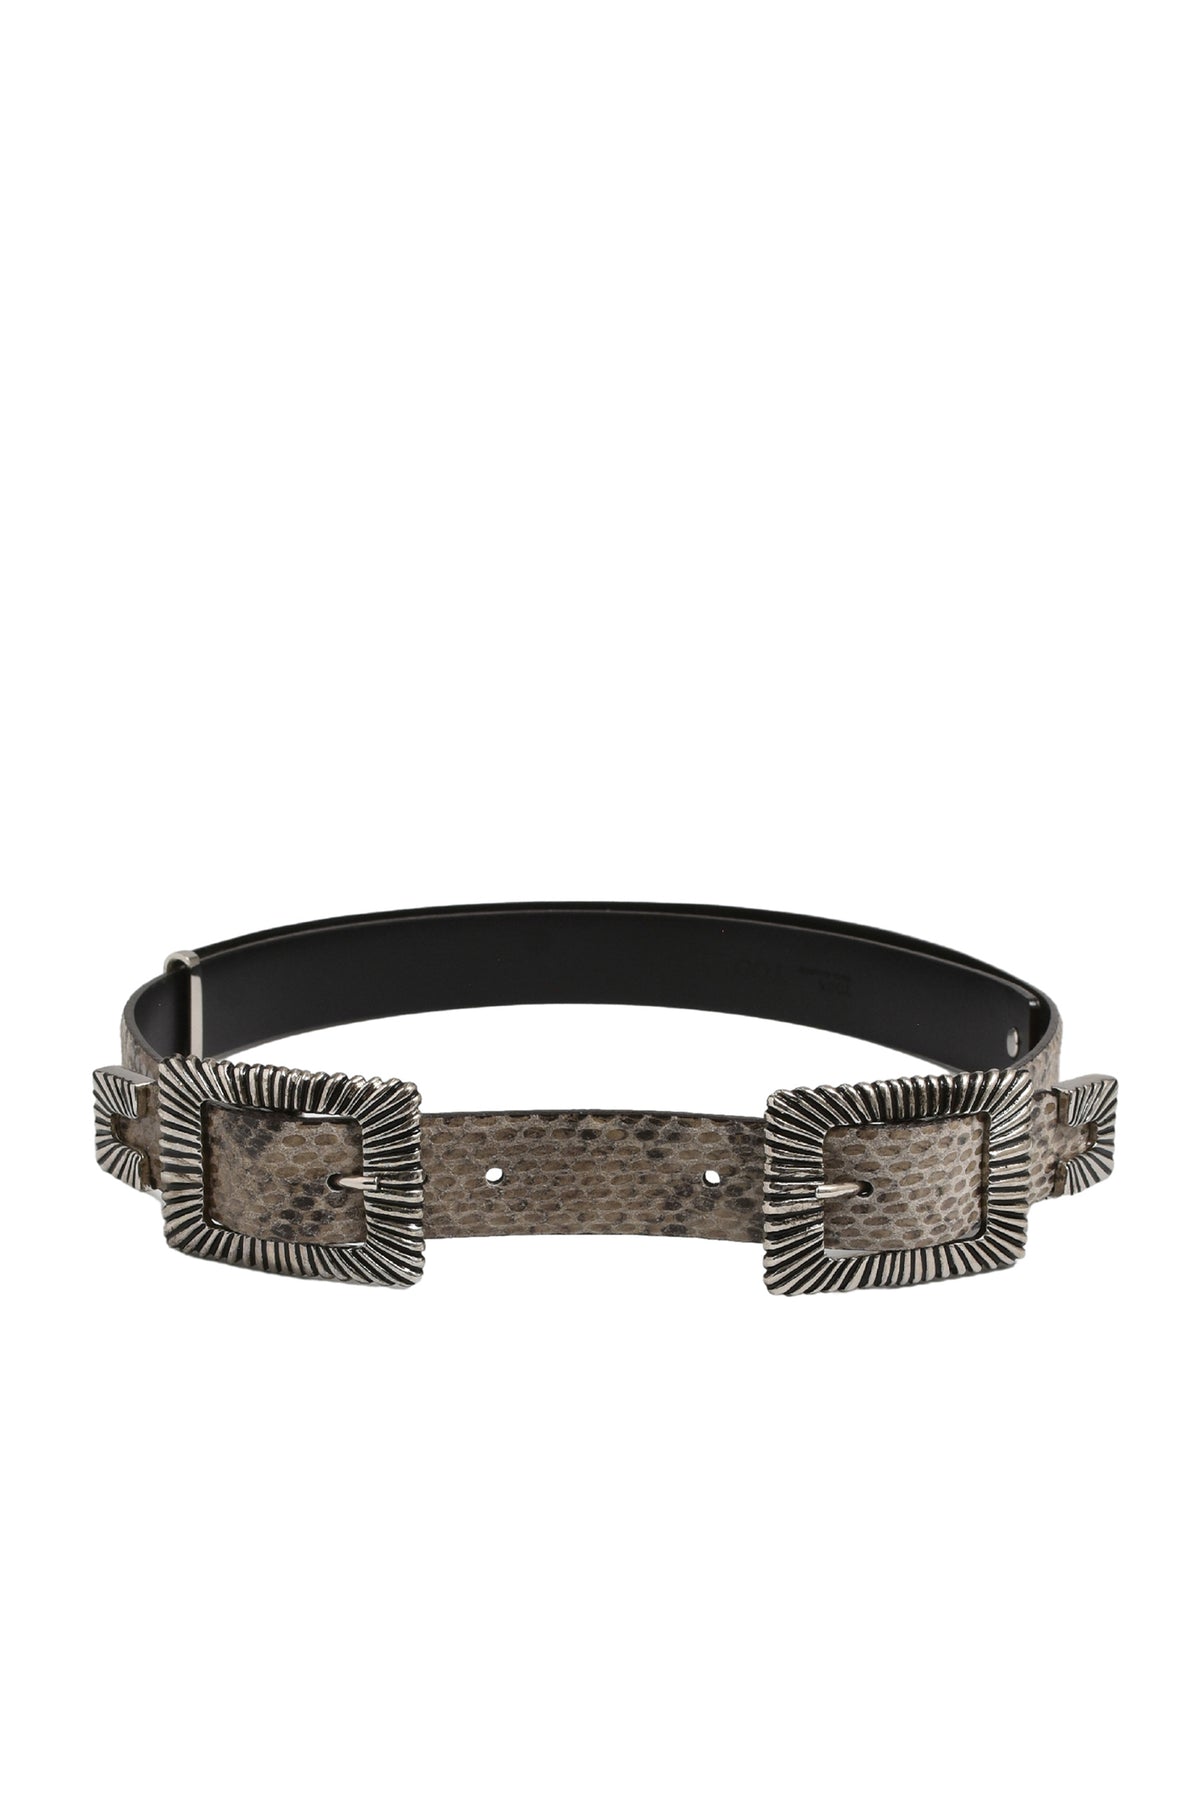 DOUBLE SQUARE BUCKLE BELT / SNAKE